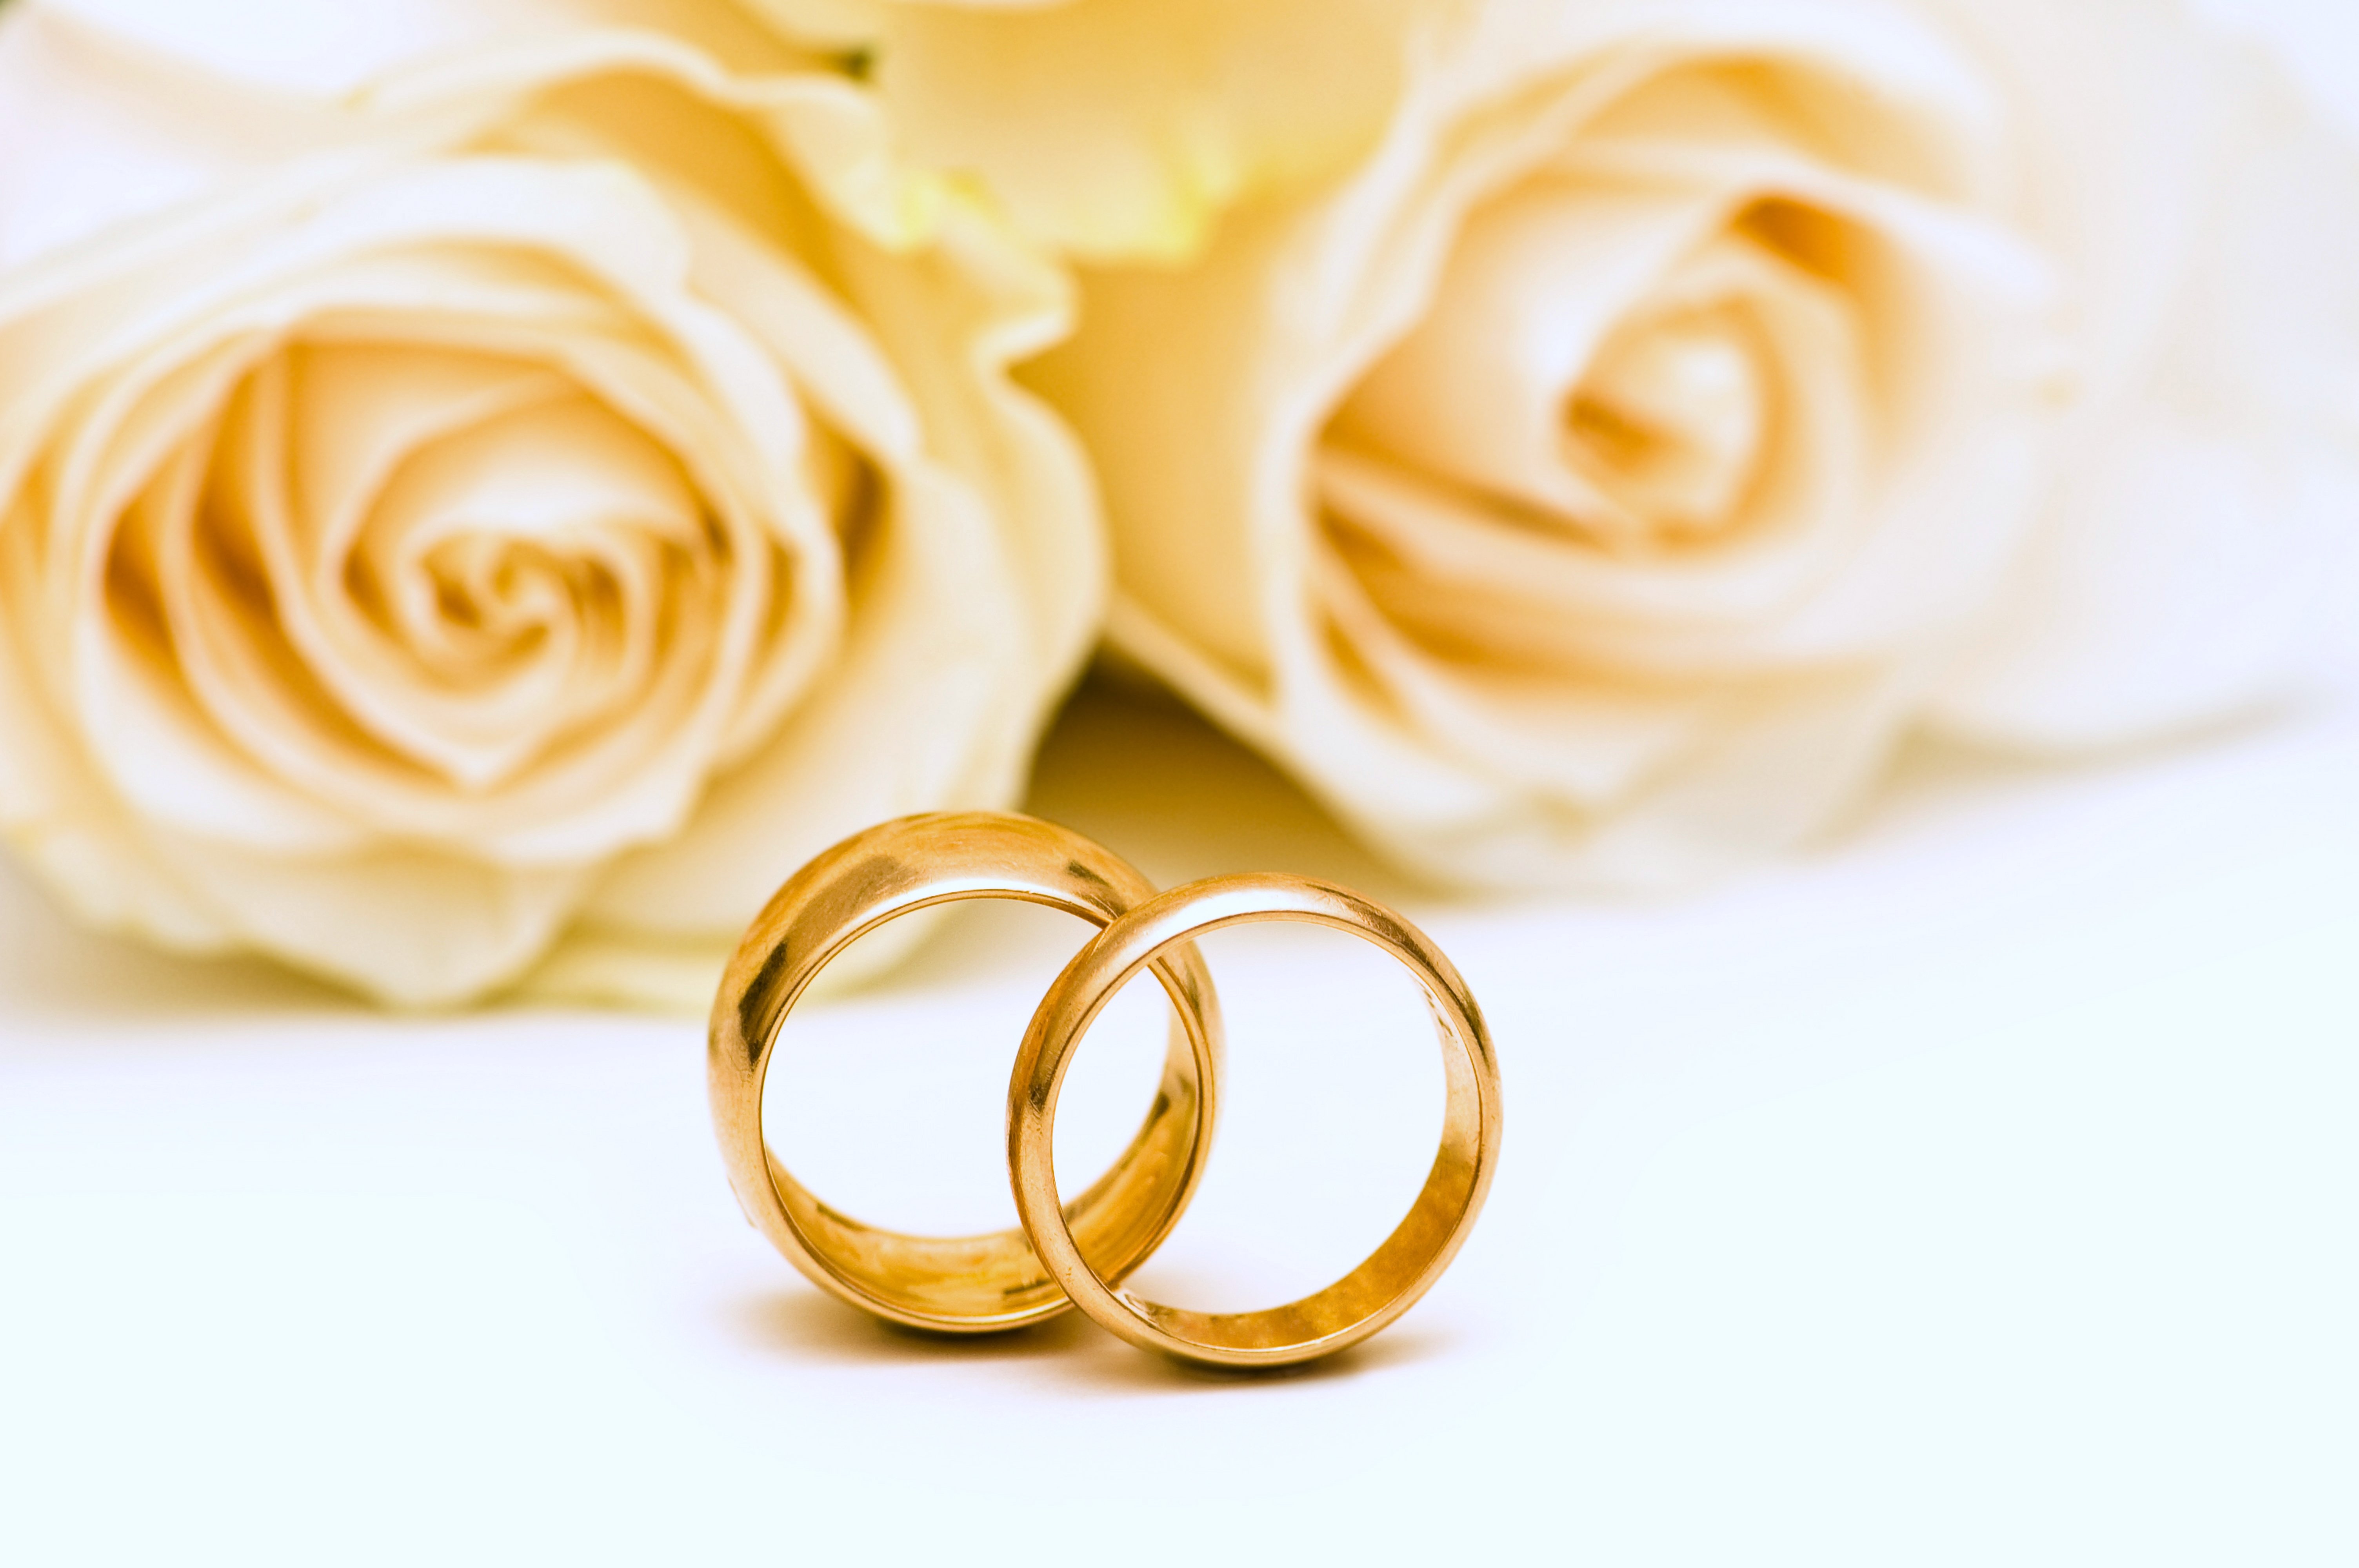 wedding, Rings, Roses, Flowers, Gold, Lovers, Yellow, Romance, Emotions